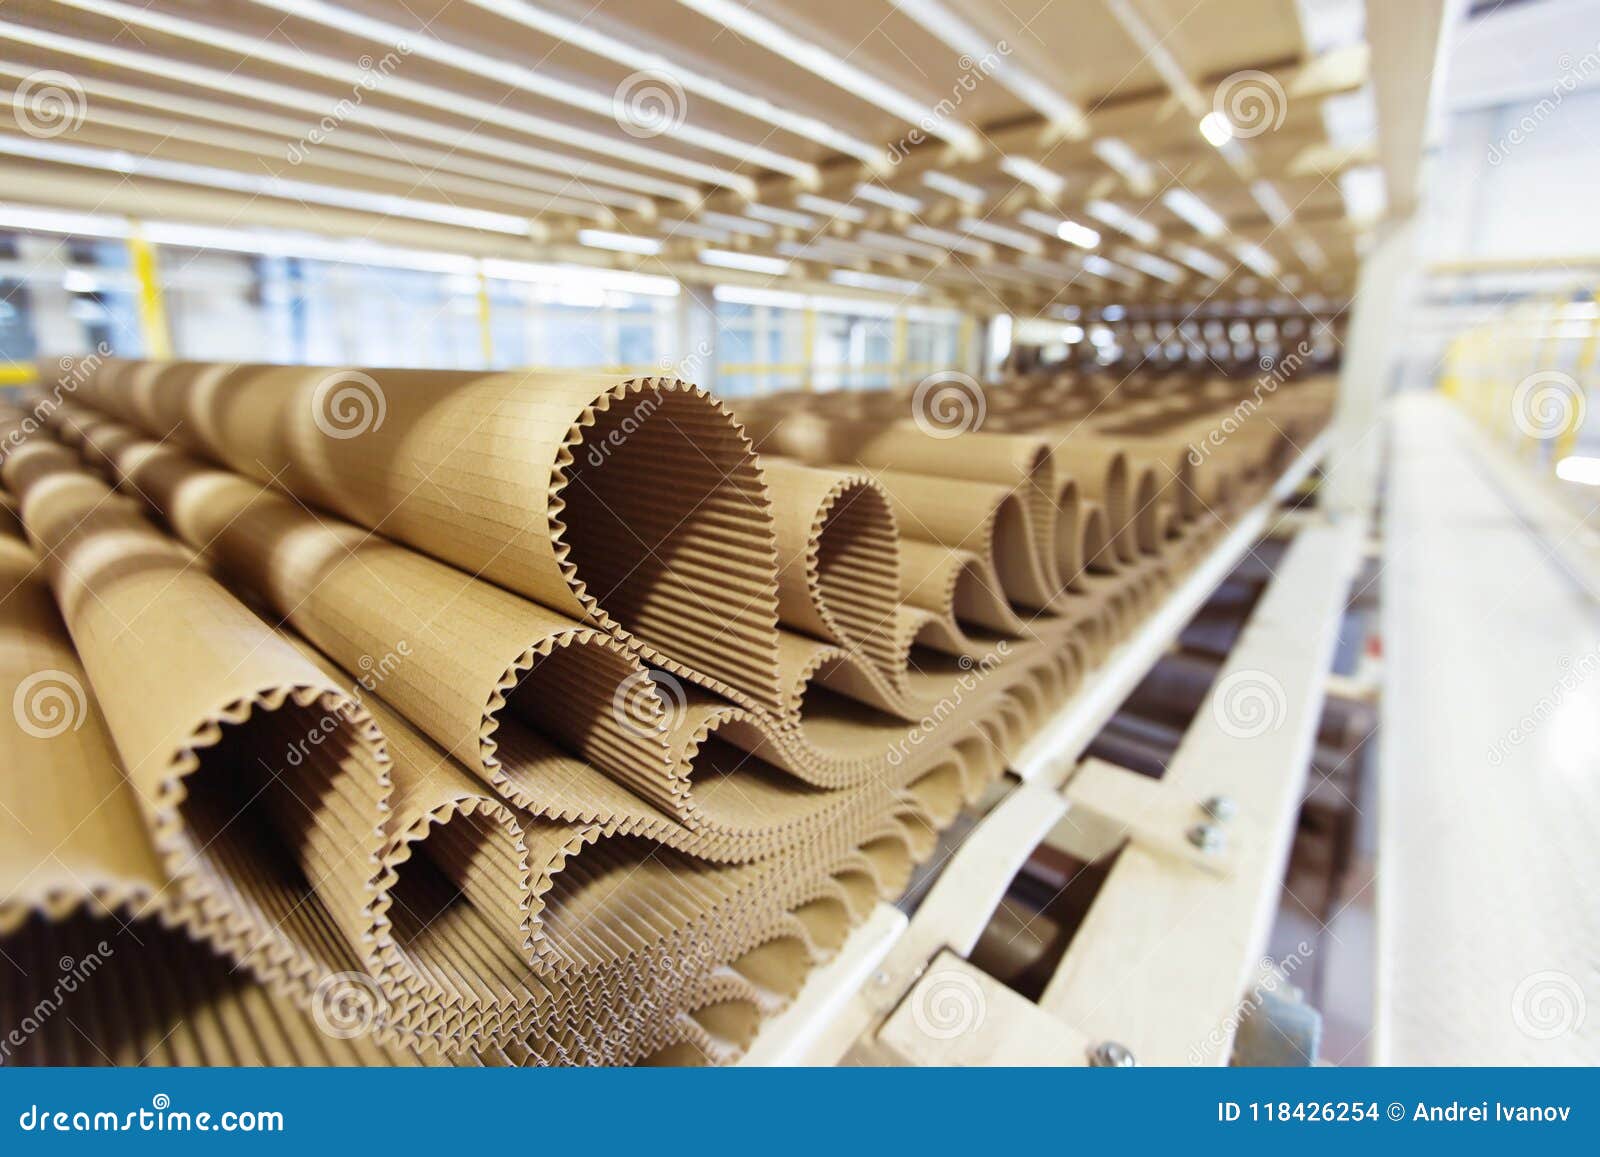 closeup image of pleat cardboard row at factory background